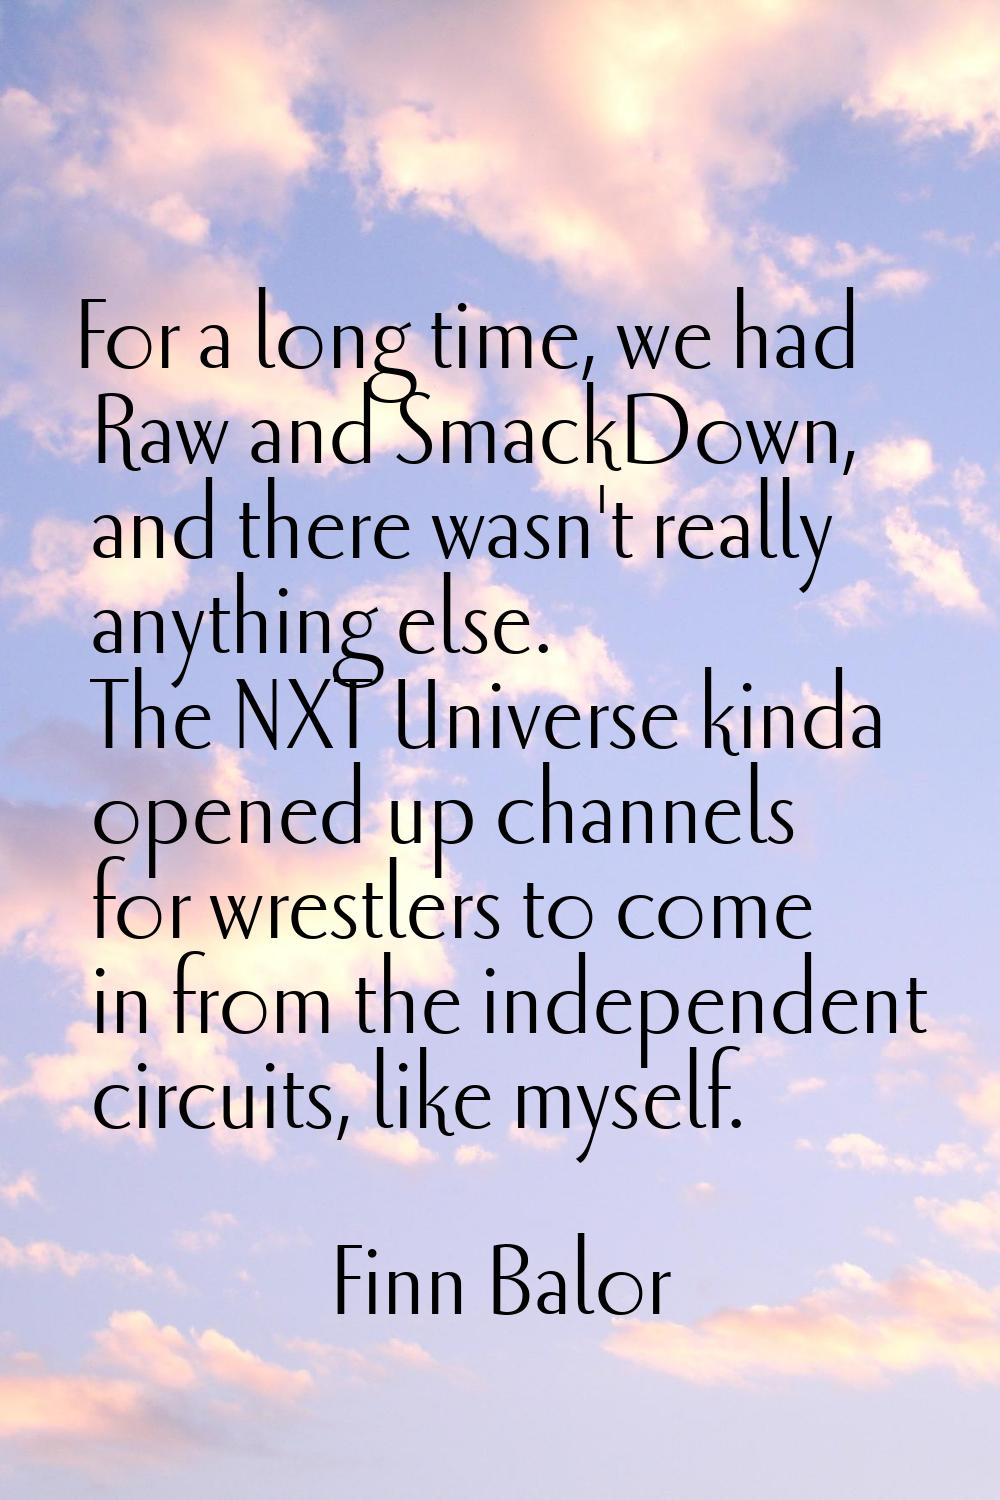 For a long time, we had Raw and SmackDown, and there wasn't really anything else. The NXT Universe 